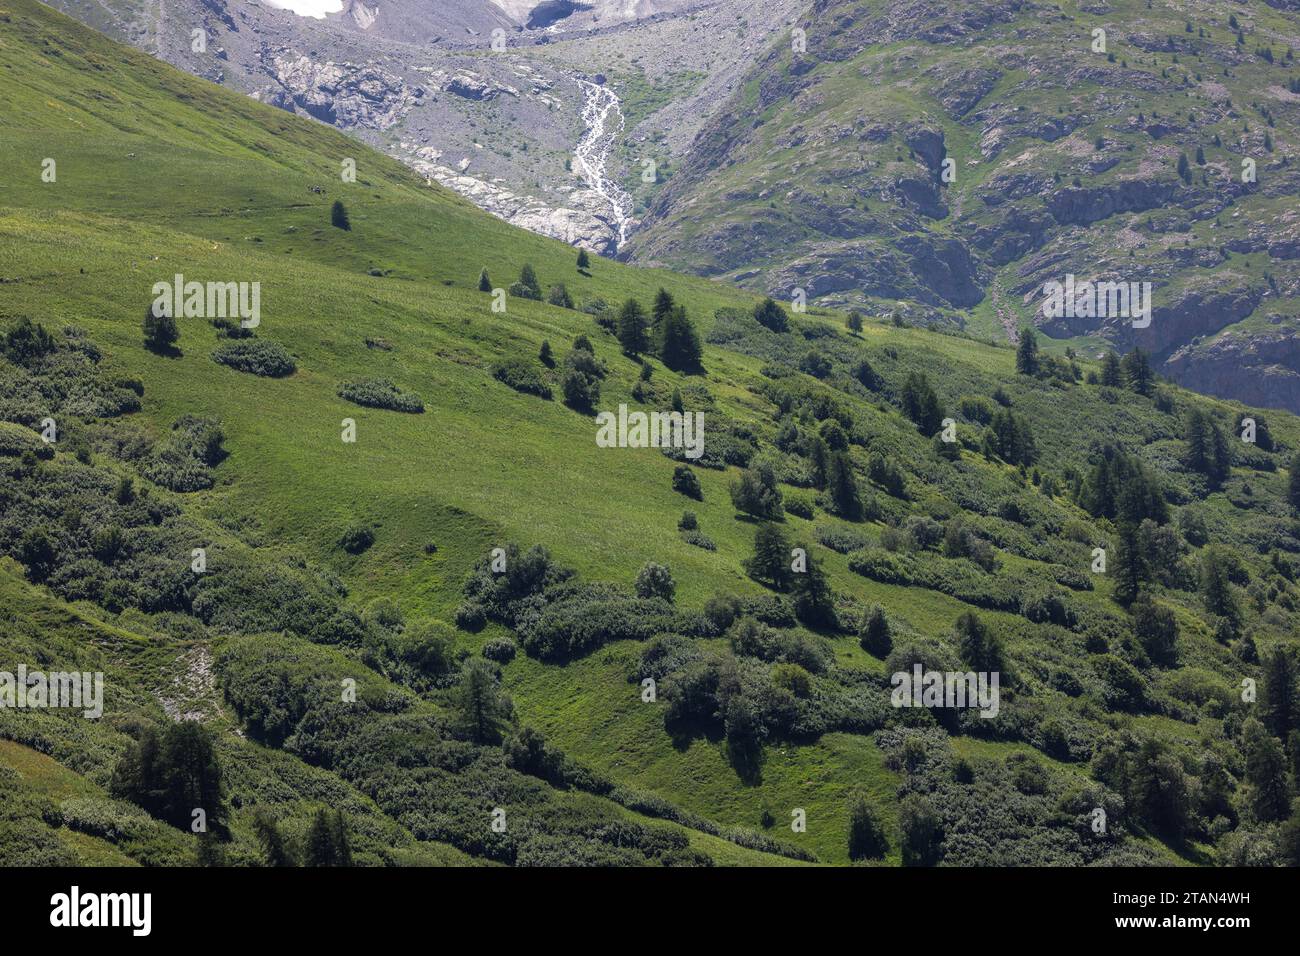 View at about 2200m on the Col du Lautaret, showing the tree-line in grazed alpine grassland. Stock Photo